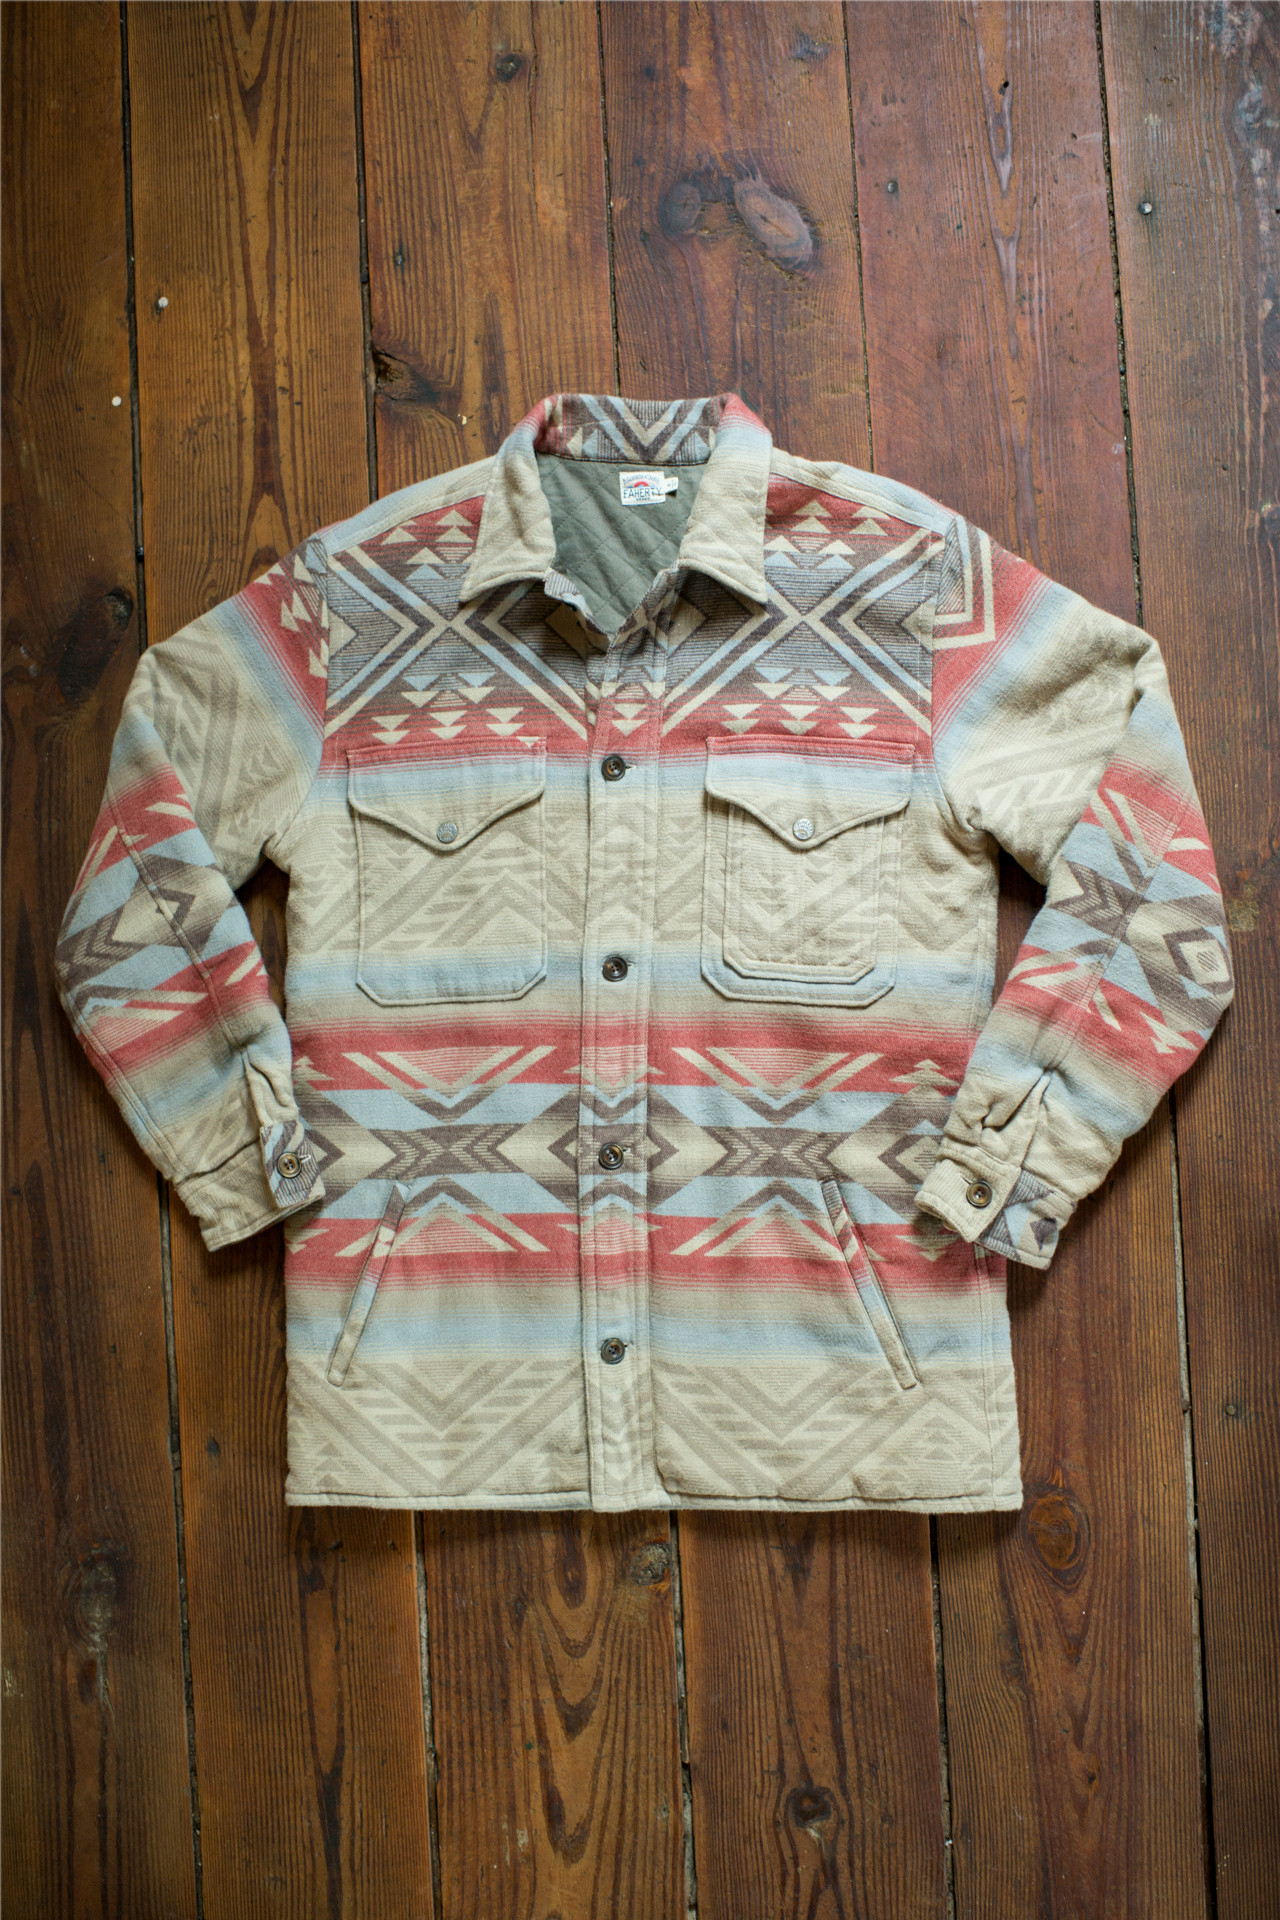 Lyst - Faherty Brand Aztec Jacket in Natural for Men